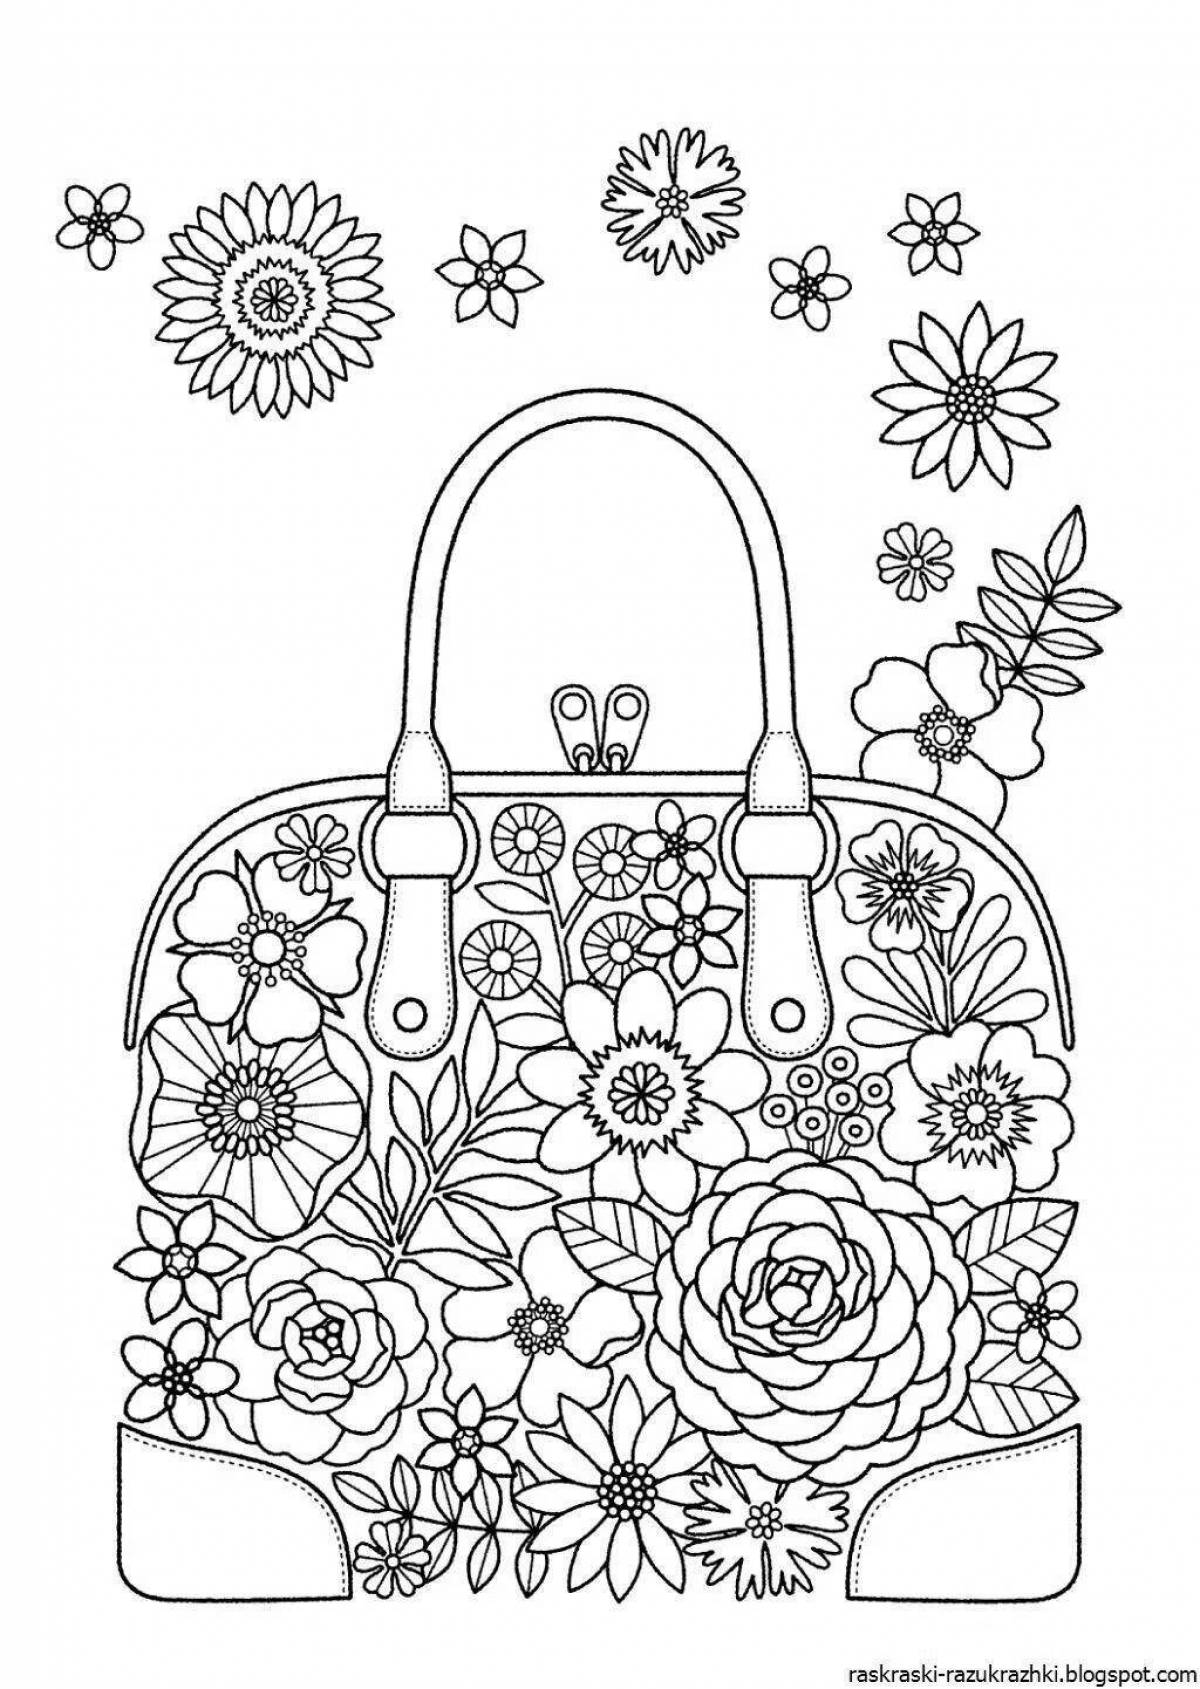 Incredible coloring book for girls of all ages